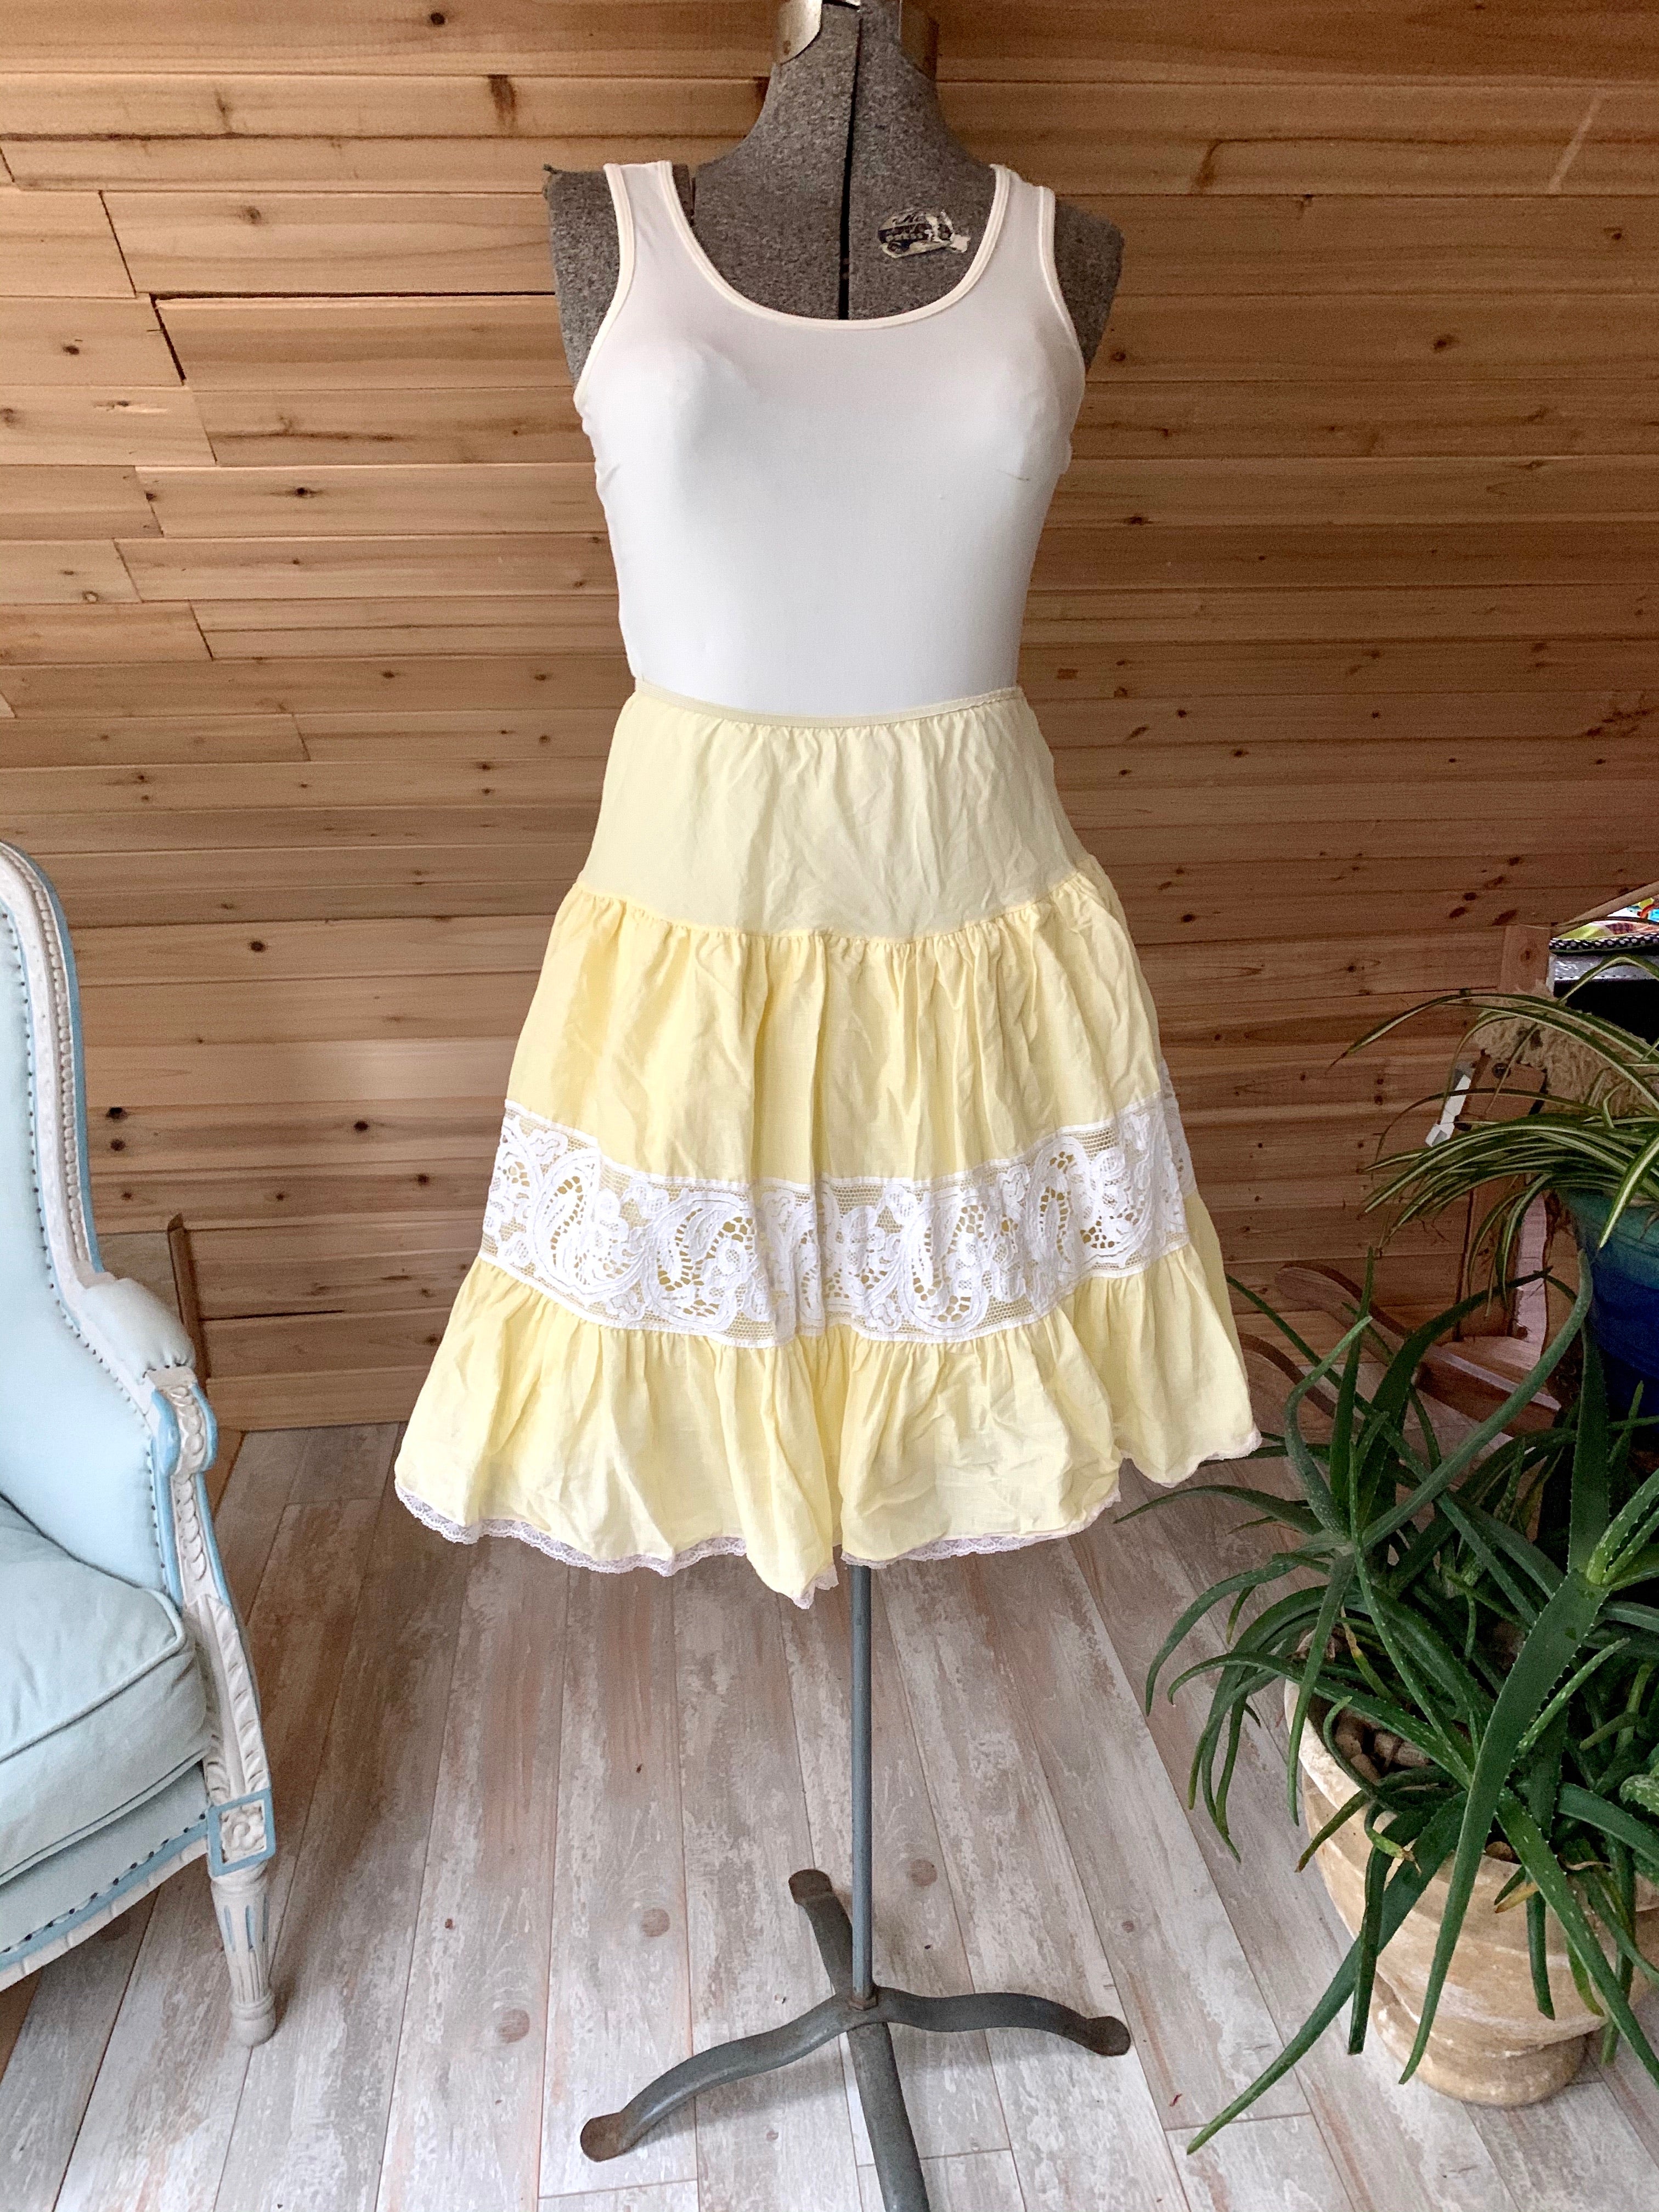 Vintage Yellow Lace Tiered Skirt